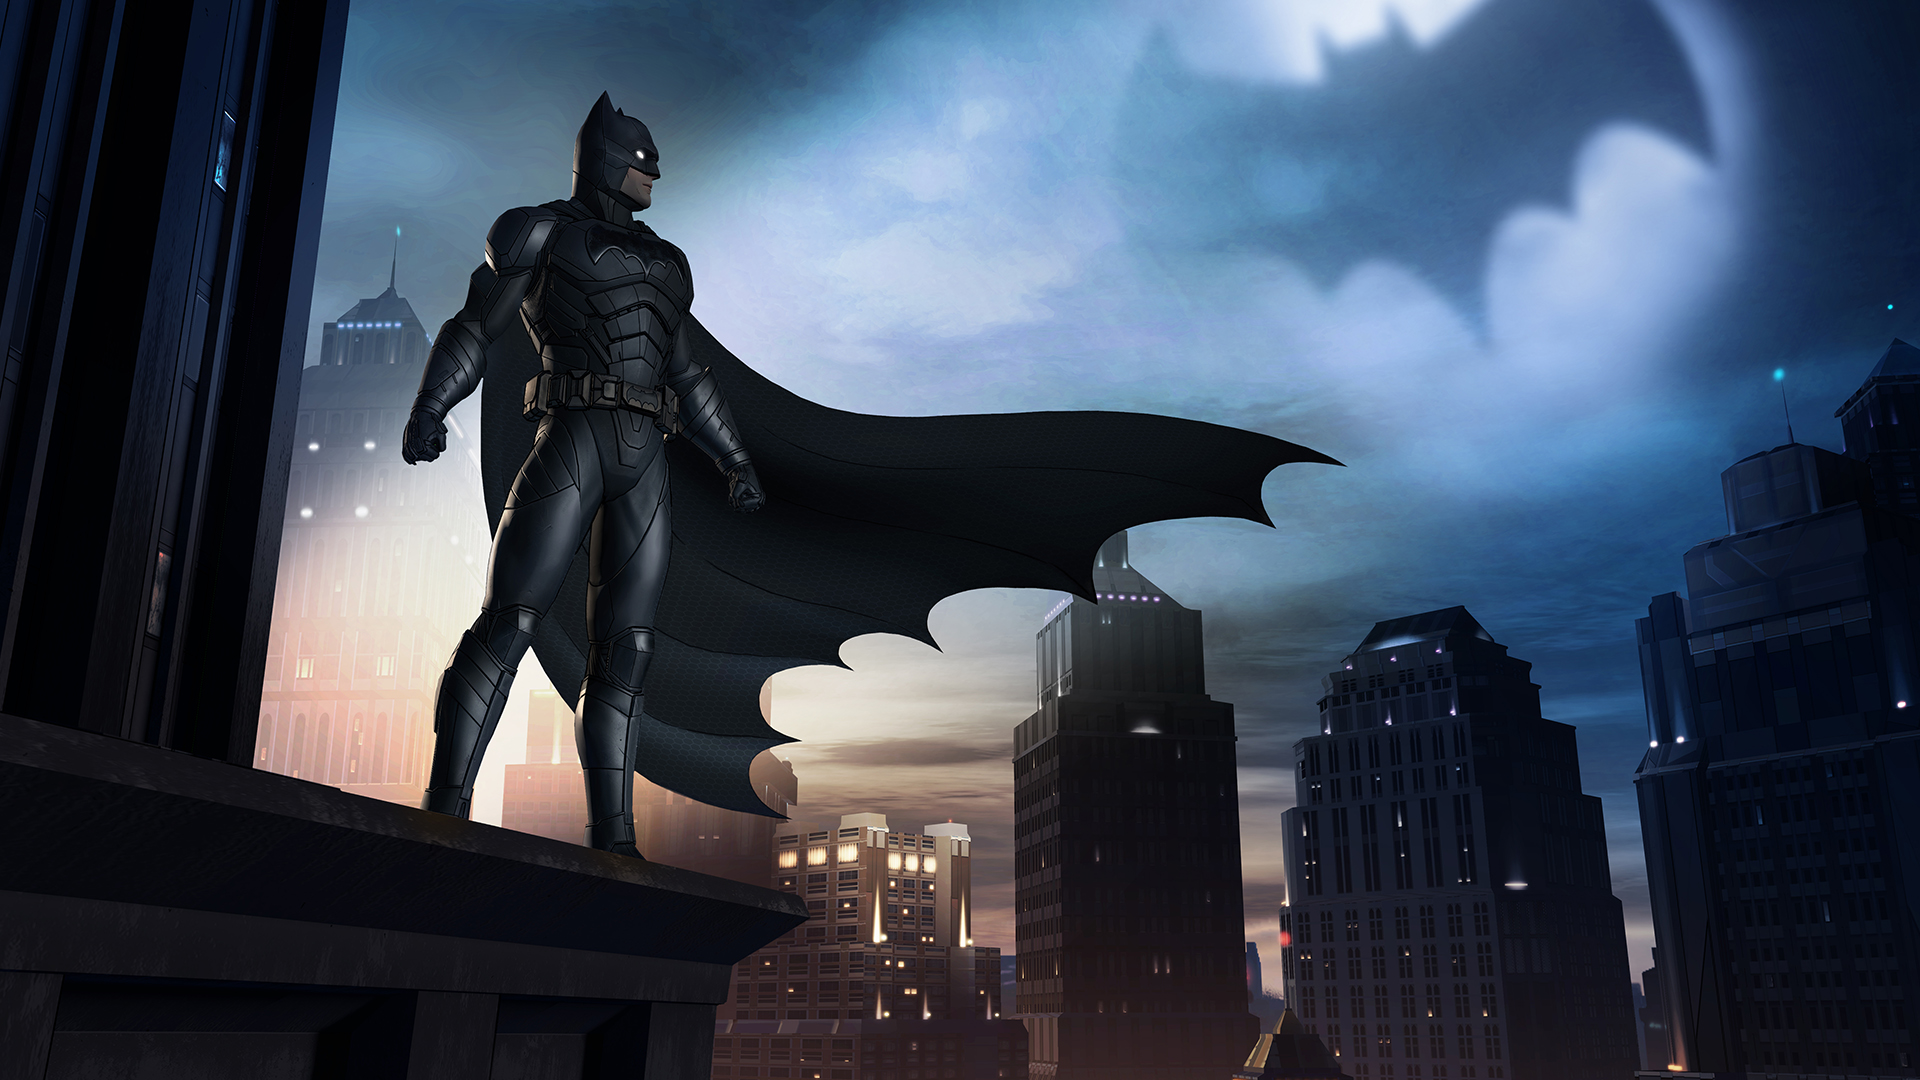 Batman: The Telltale Series: The Enemy Within